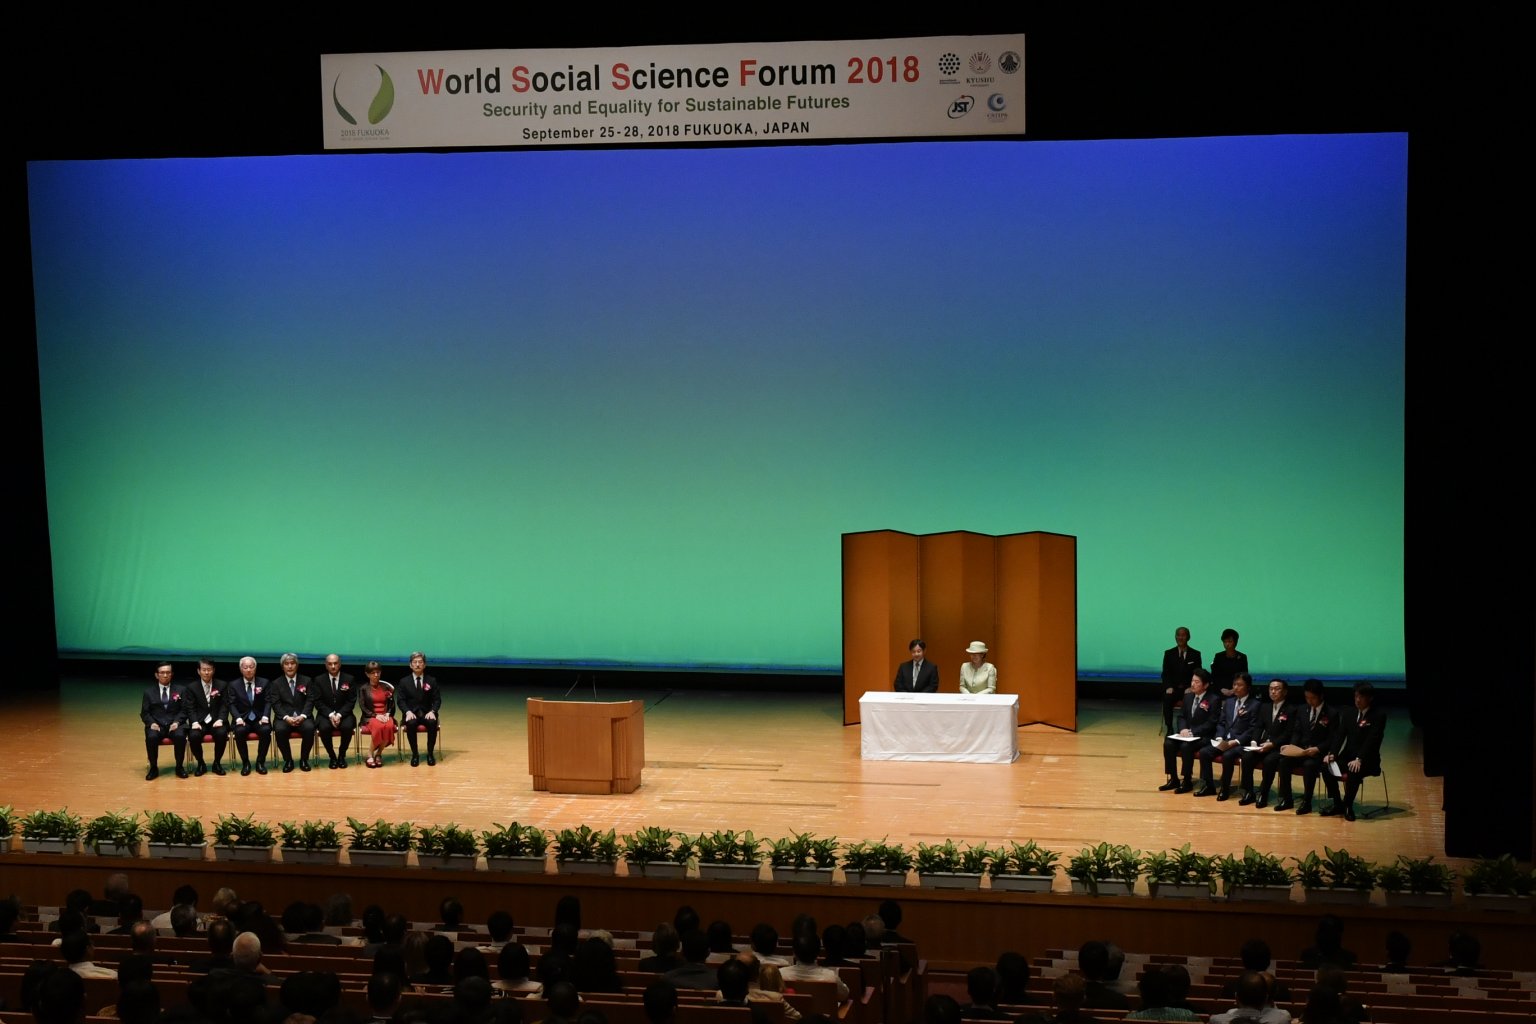 Their Imperial Highnesses the Crown Prince and Princess of Japan open the World Social Science Forum